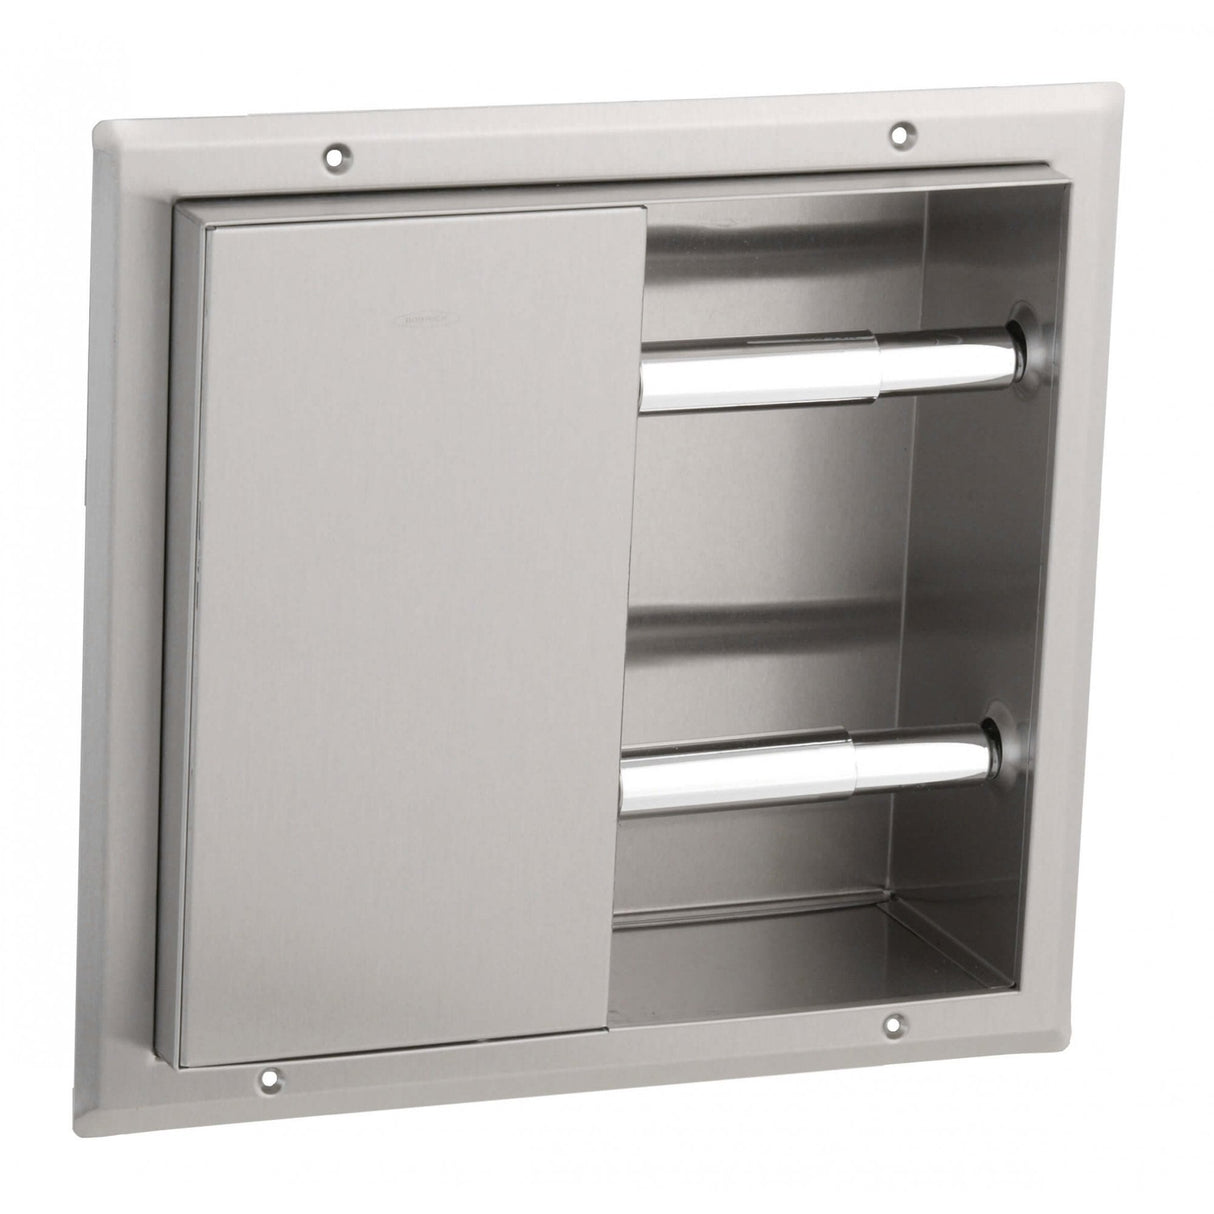 B-386 Double Toilet Roll Holder for Two Partitions